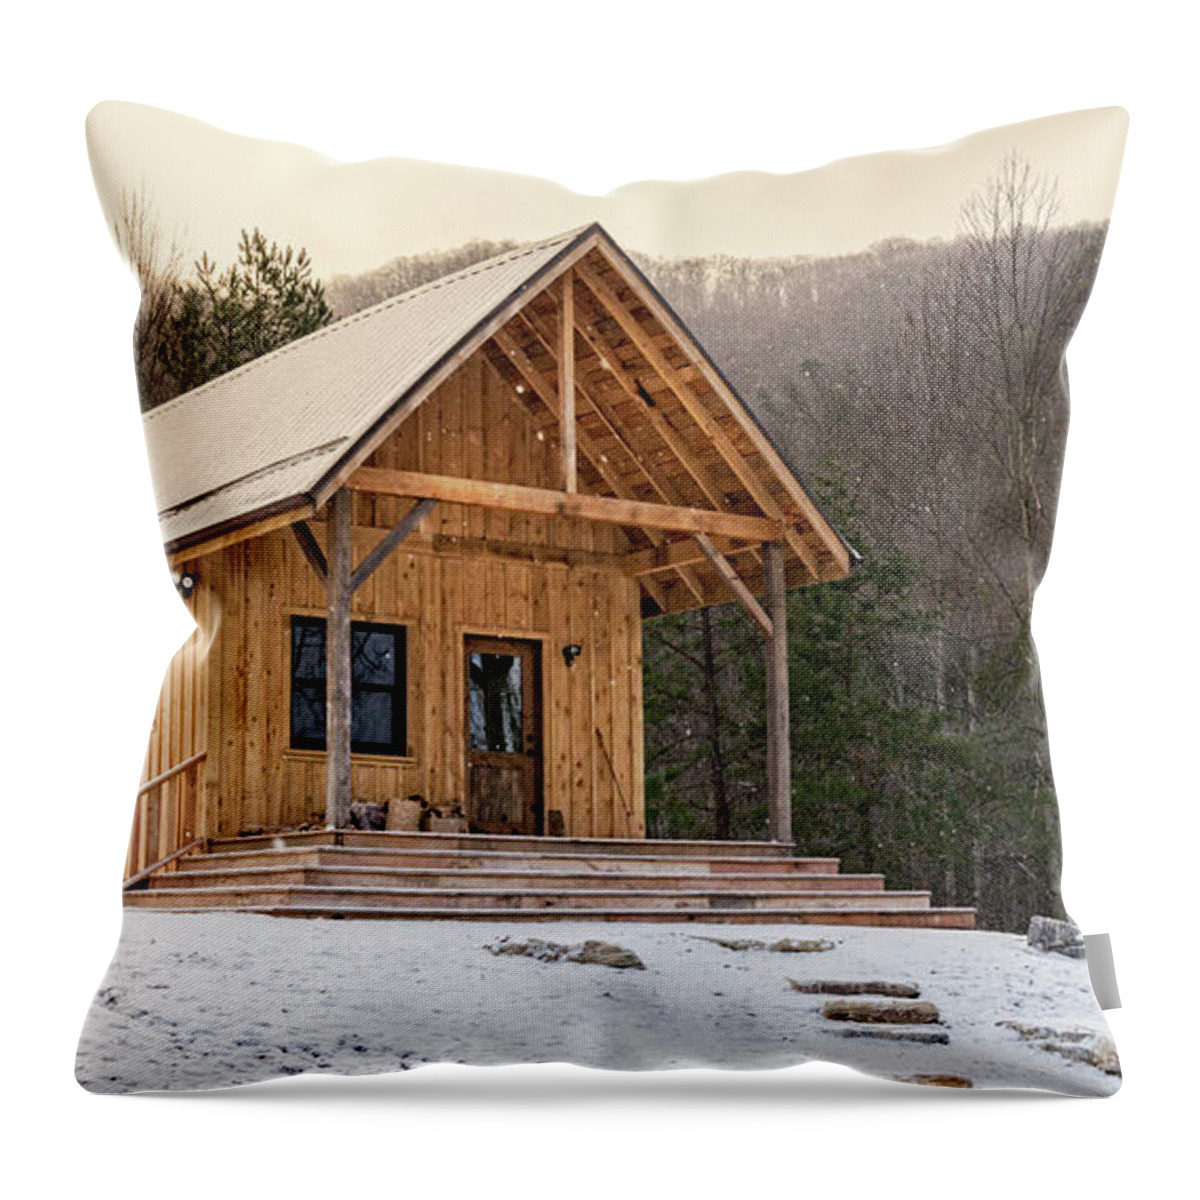 Recreational Pursuit Throw Pillow featuring the photograph Rustic Appalachian Cabin In Snow by Wbritten